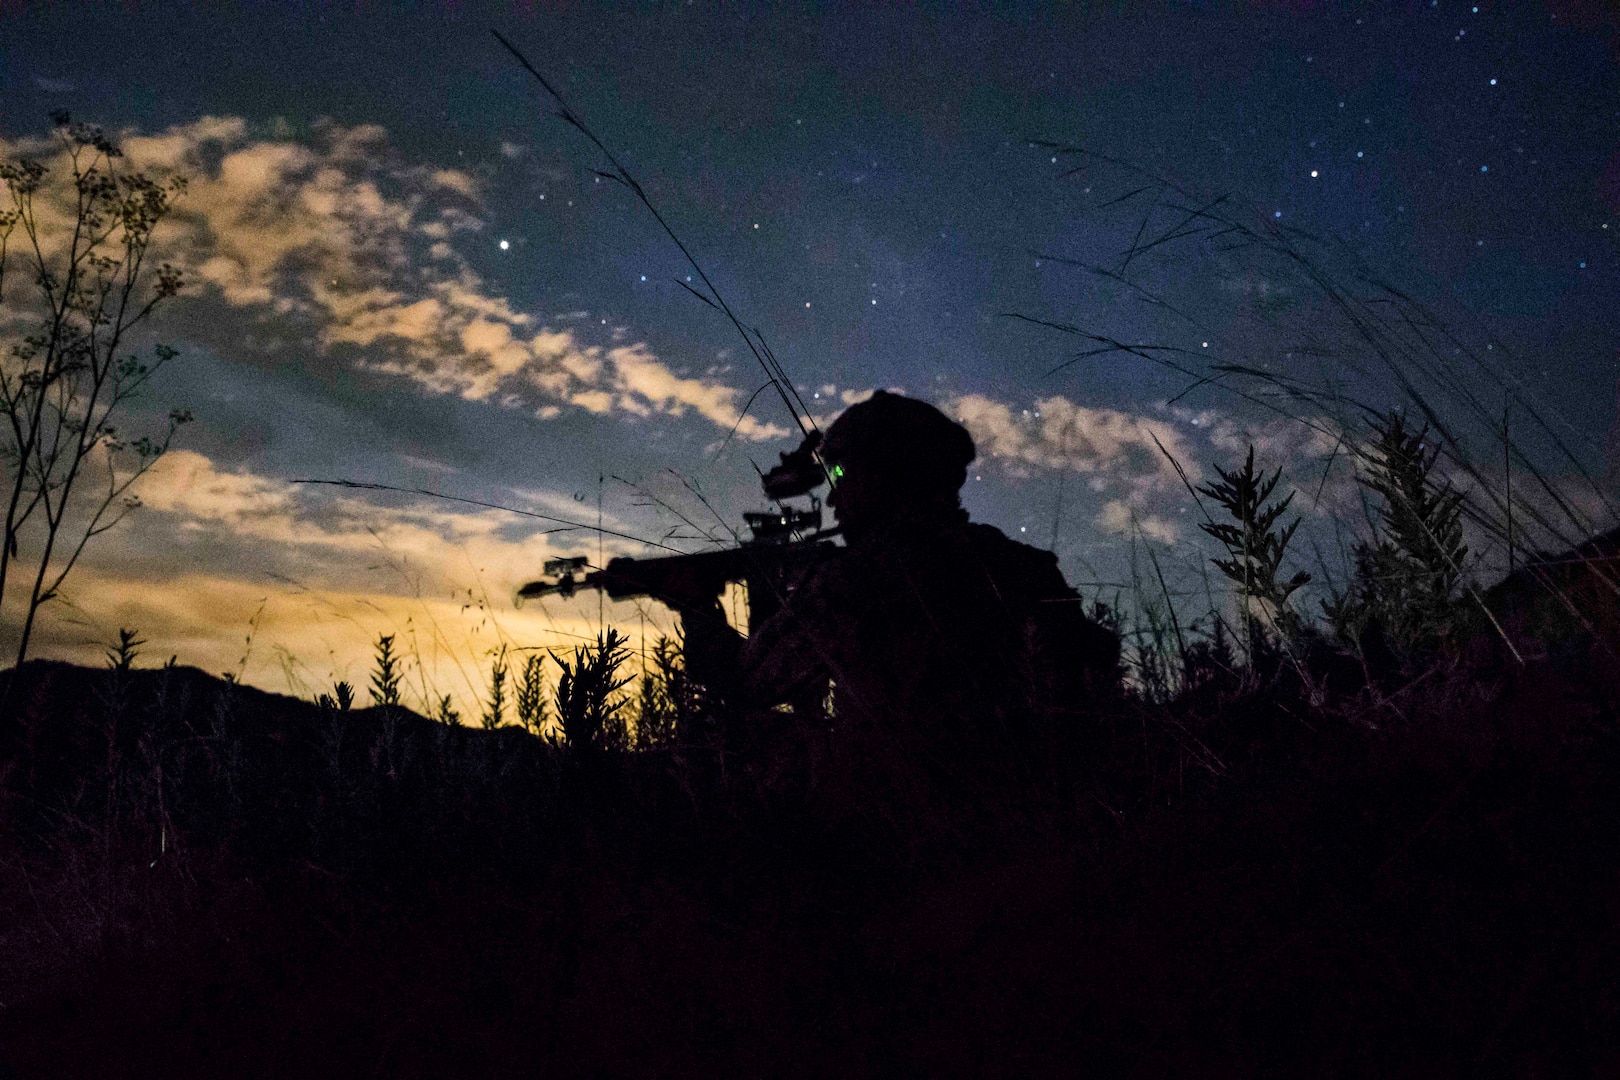 A Marine holds up a weapon in a grassy field at night.